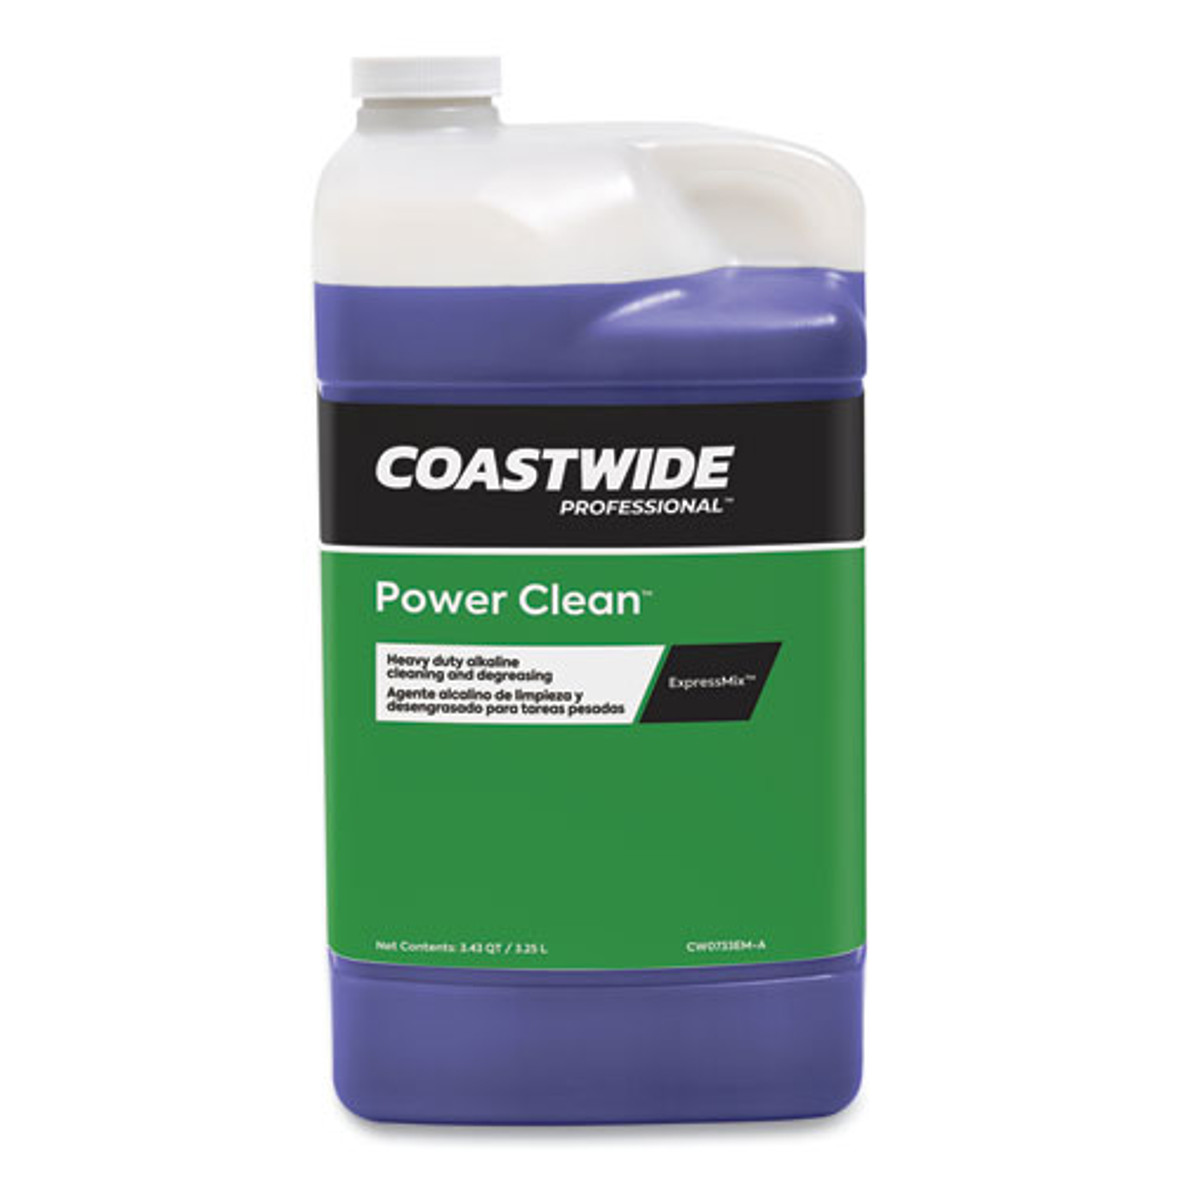 Coastwide Professional™ Power Clean Heavy-Duty Cleaner and Degreaser Concentrate for ExpressMix